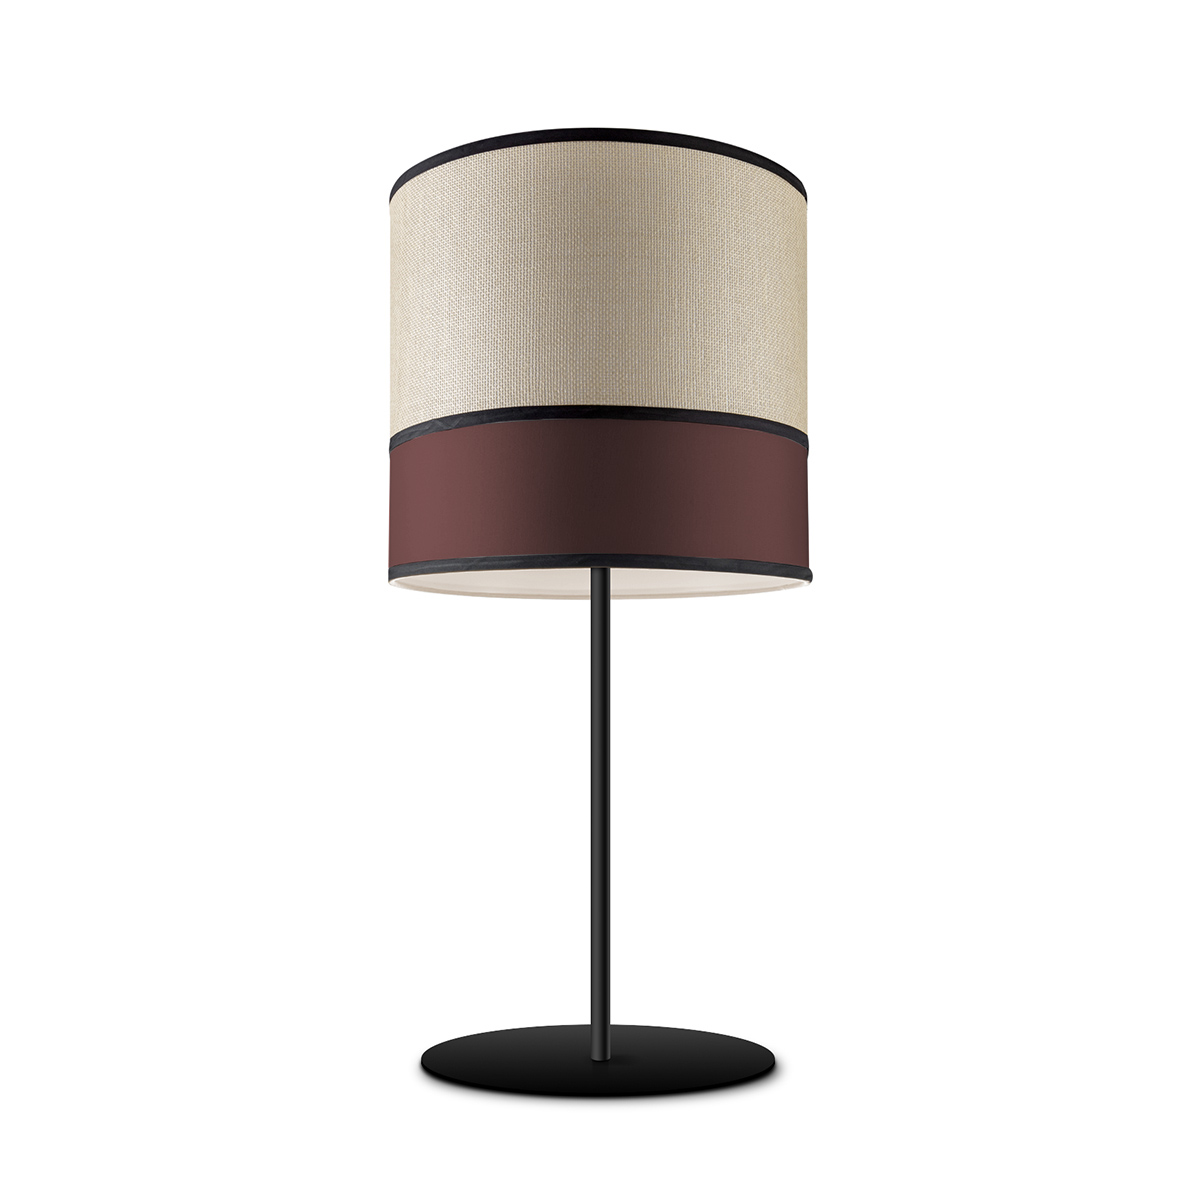 Tangla lighting - TLT7041-25RD - LED table lamp 1 Light - metal and paper and TC fabric in red - bright - E27